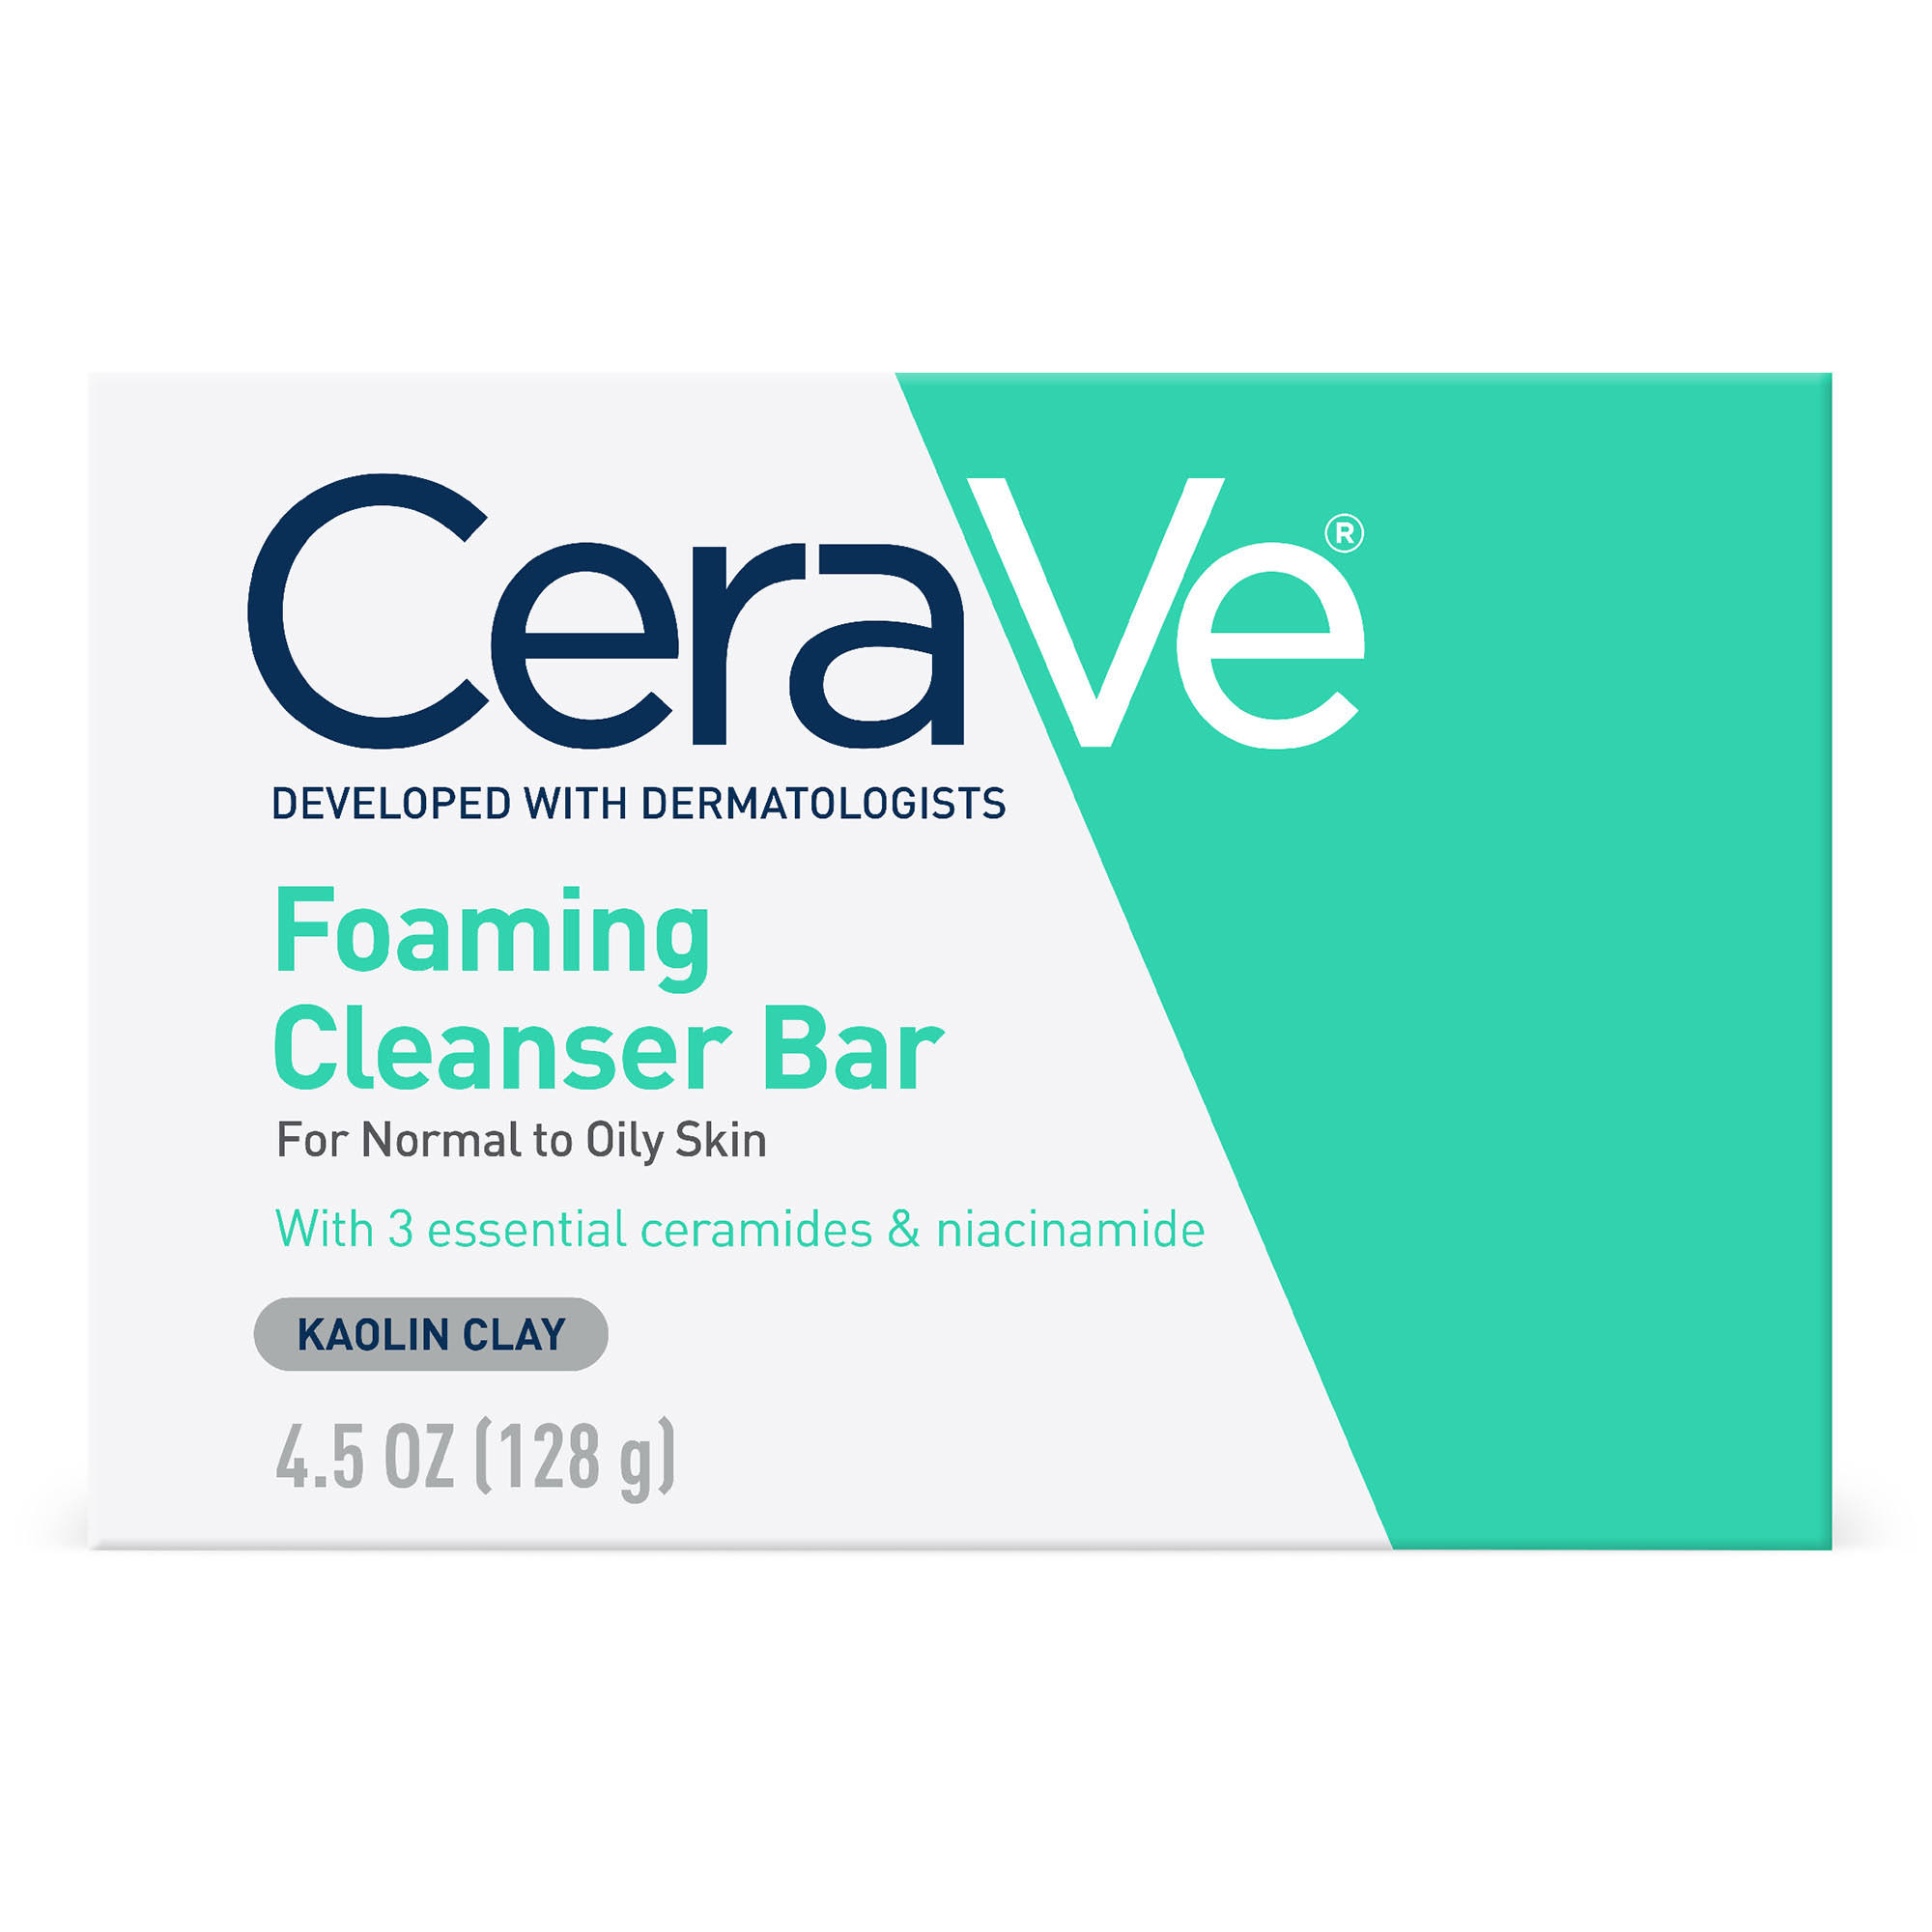 Cerave Foaming Cleanser Bar, Kaolin Clay - 4.5 oz